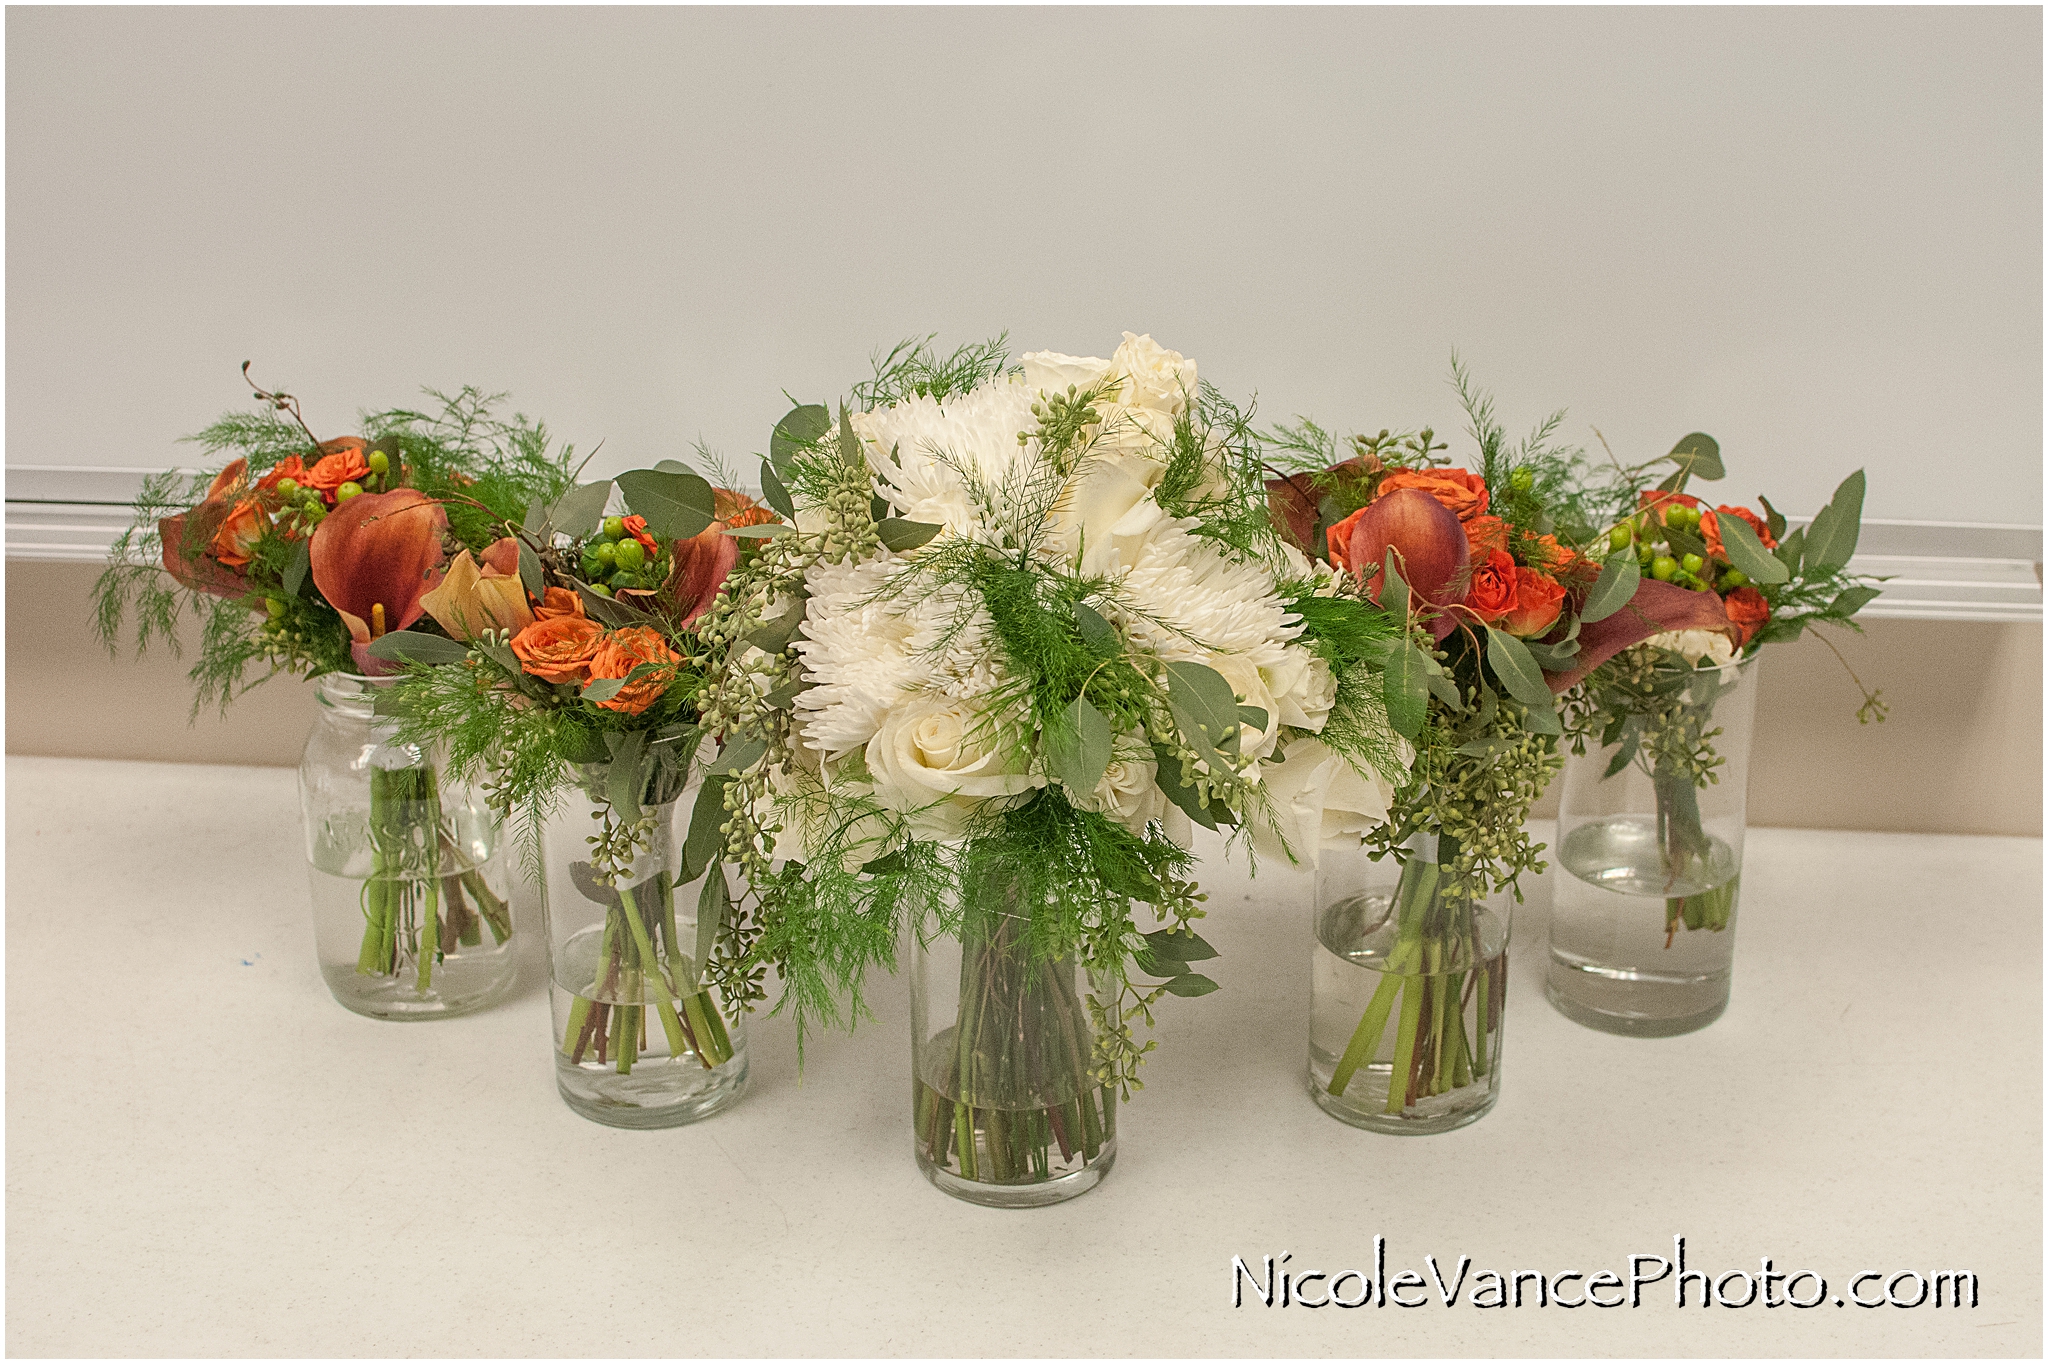 These bridal and bridemaid bouquets are by Marylee Marmer Events.